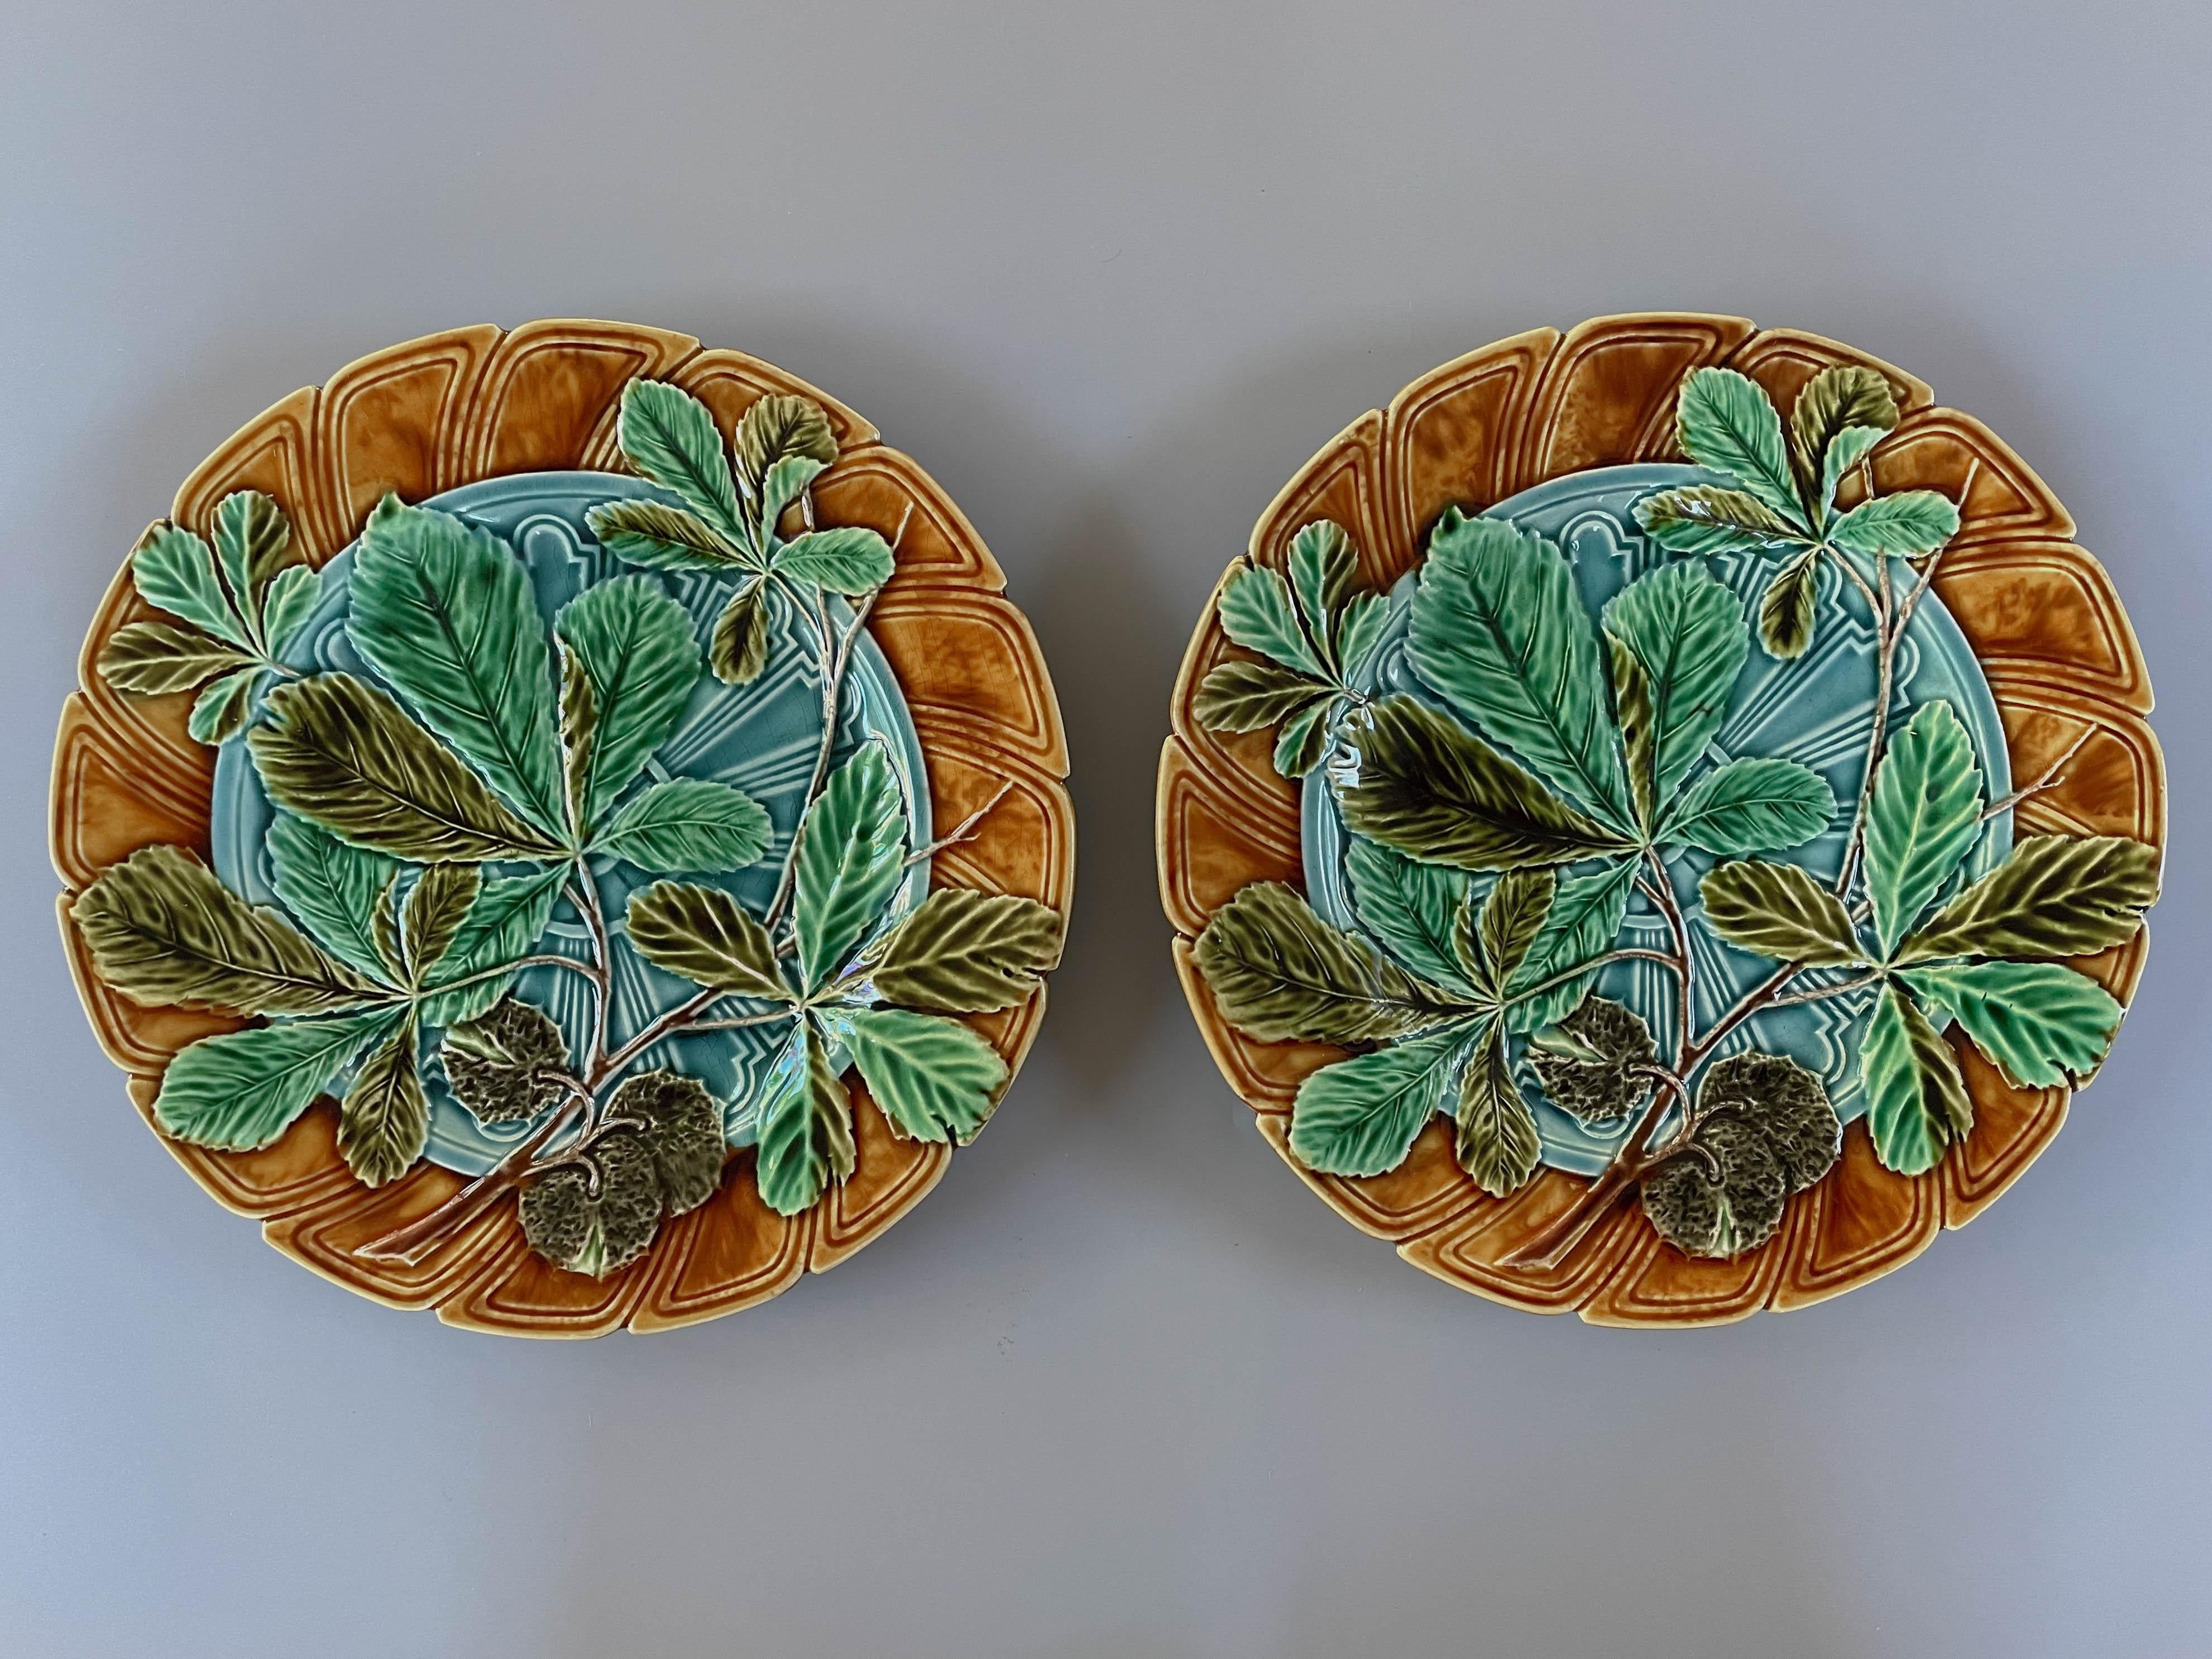 A pair of 19th century French Sarreguemines Majolica glazed ceramic plates with chesnut leaf pattern in shades of green, on turquoise blue ground and ochre rim. Blue glaze on the reverse side. Marked verso: Majolica Sarreguemines. Circa 1890-1899.